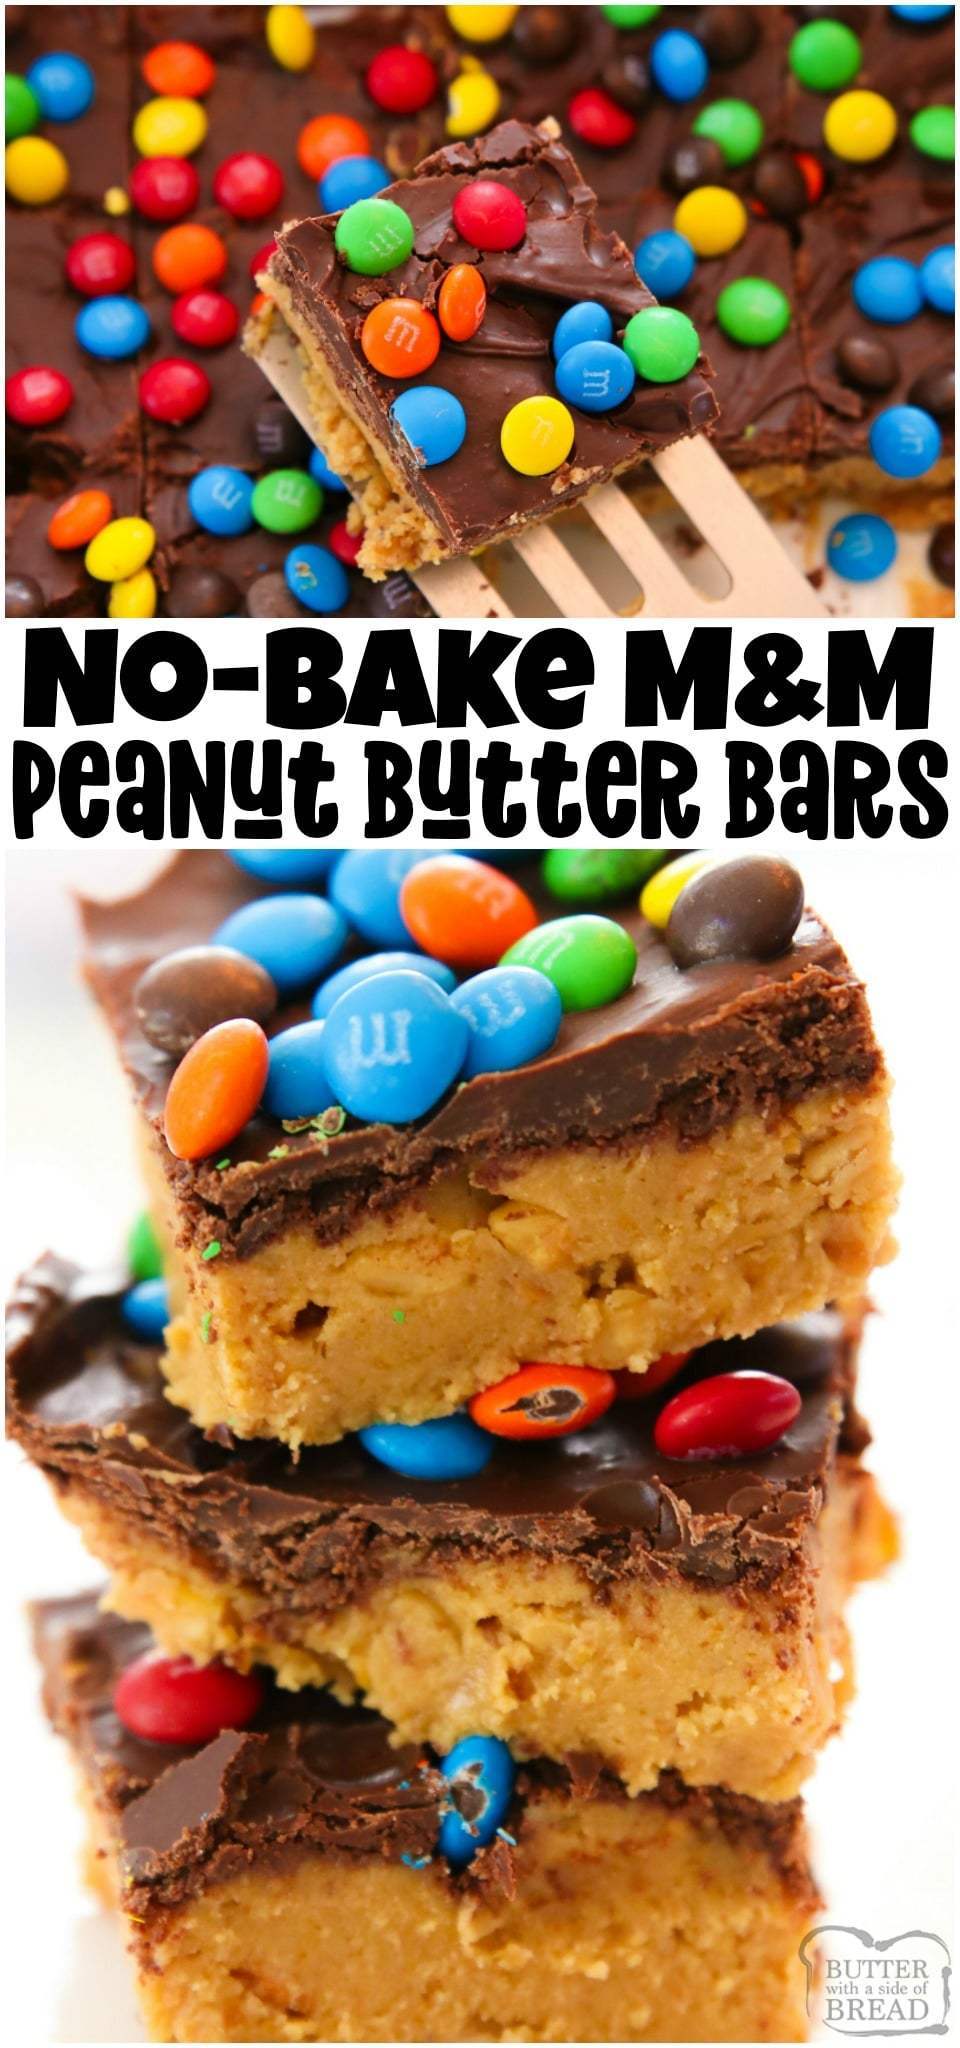 No Bake M&M Peanut Butter Bars are the perfect no-bake dessert to make this summer! Graham cracker crumbs, peanut butter and both chocolate chips and M&M's combine in this sweet and salty treat.